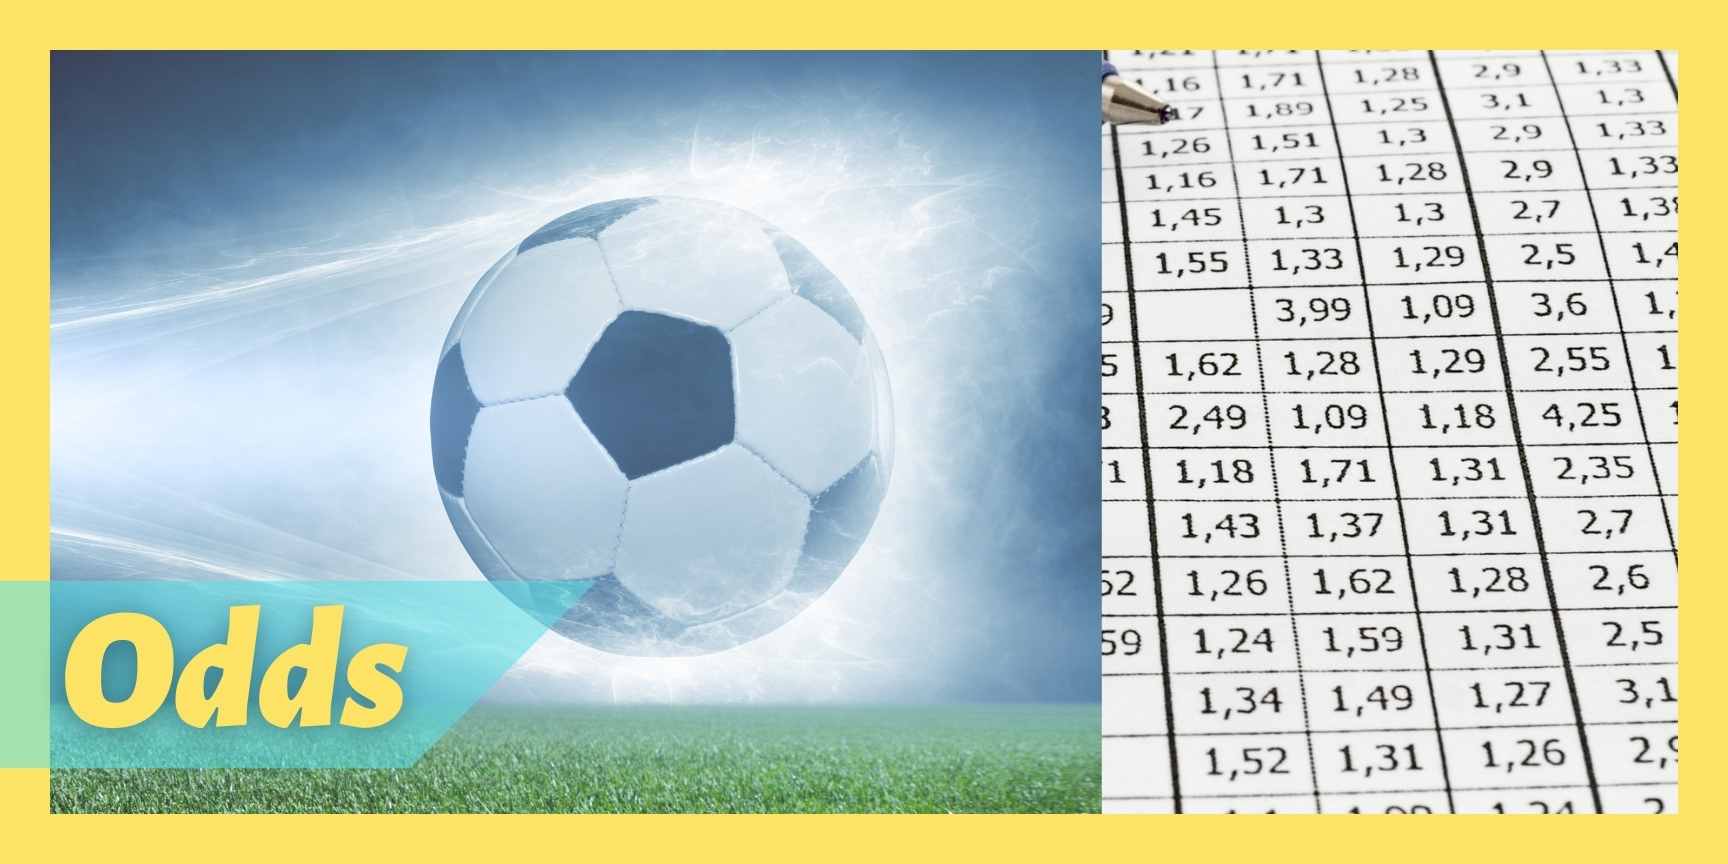 Why do people need to consider odds when participating in soccer betting?